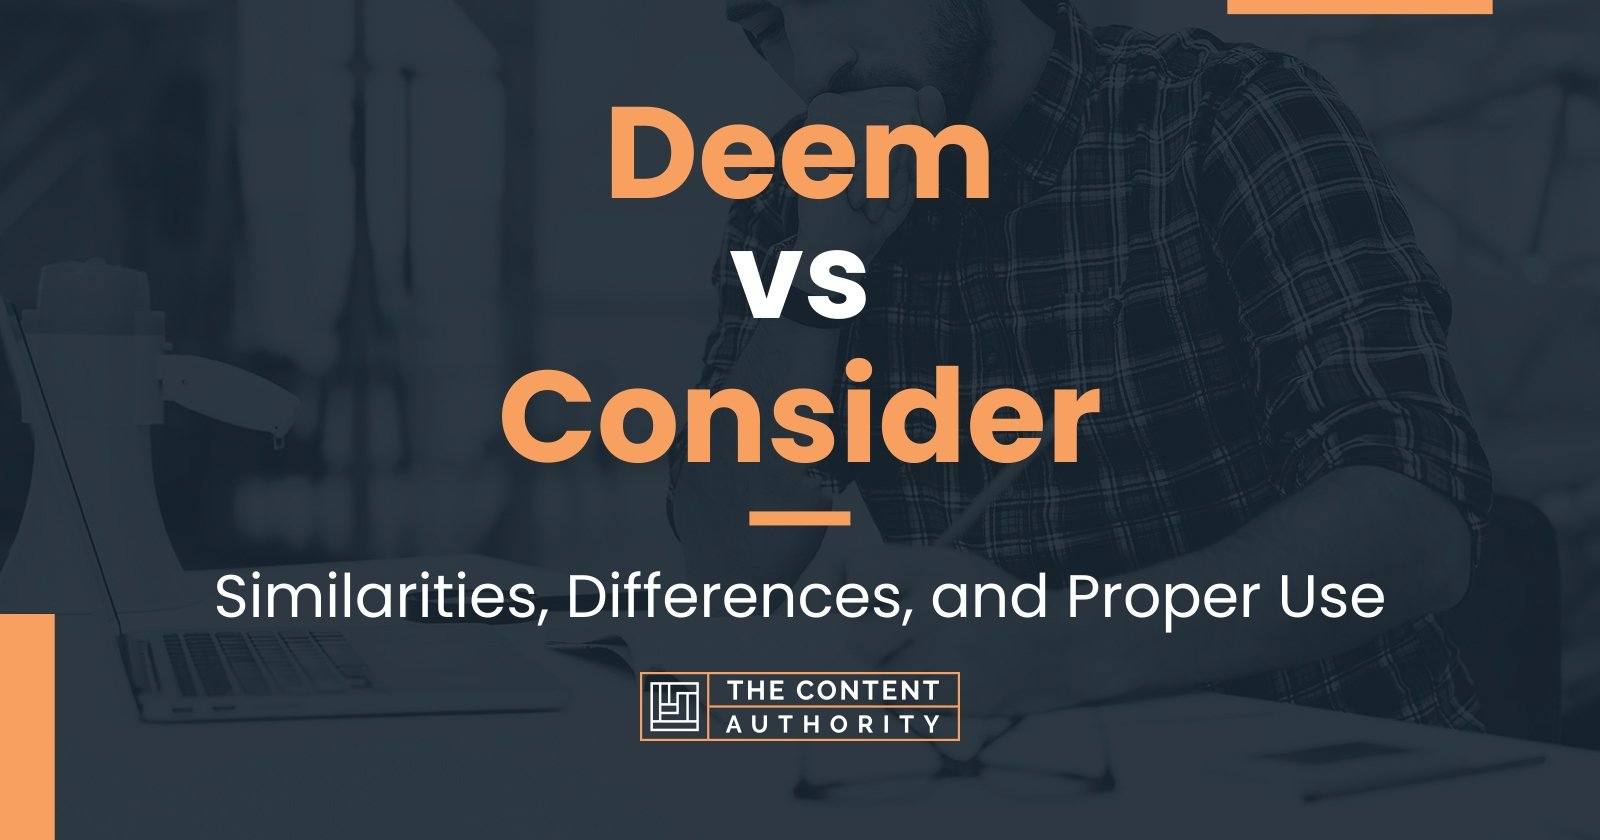 Deem vs Consider: Similarities, Differences, and Proper Use